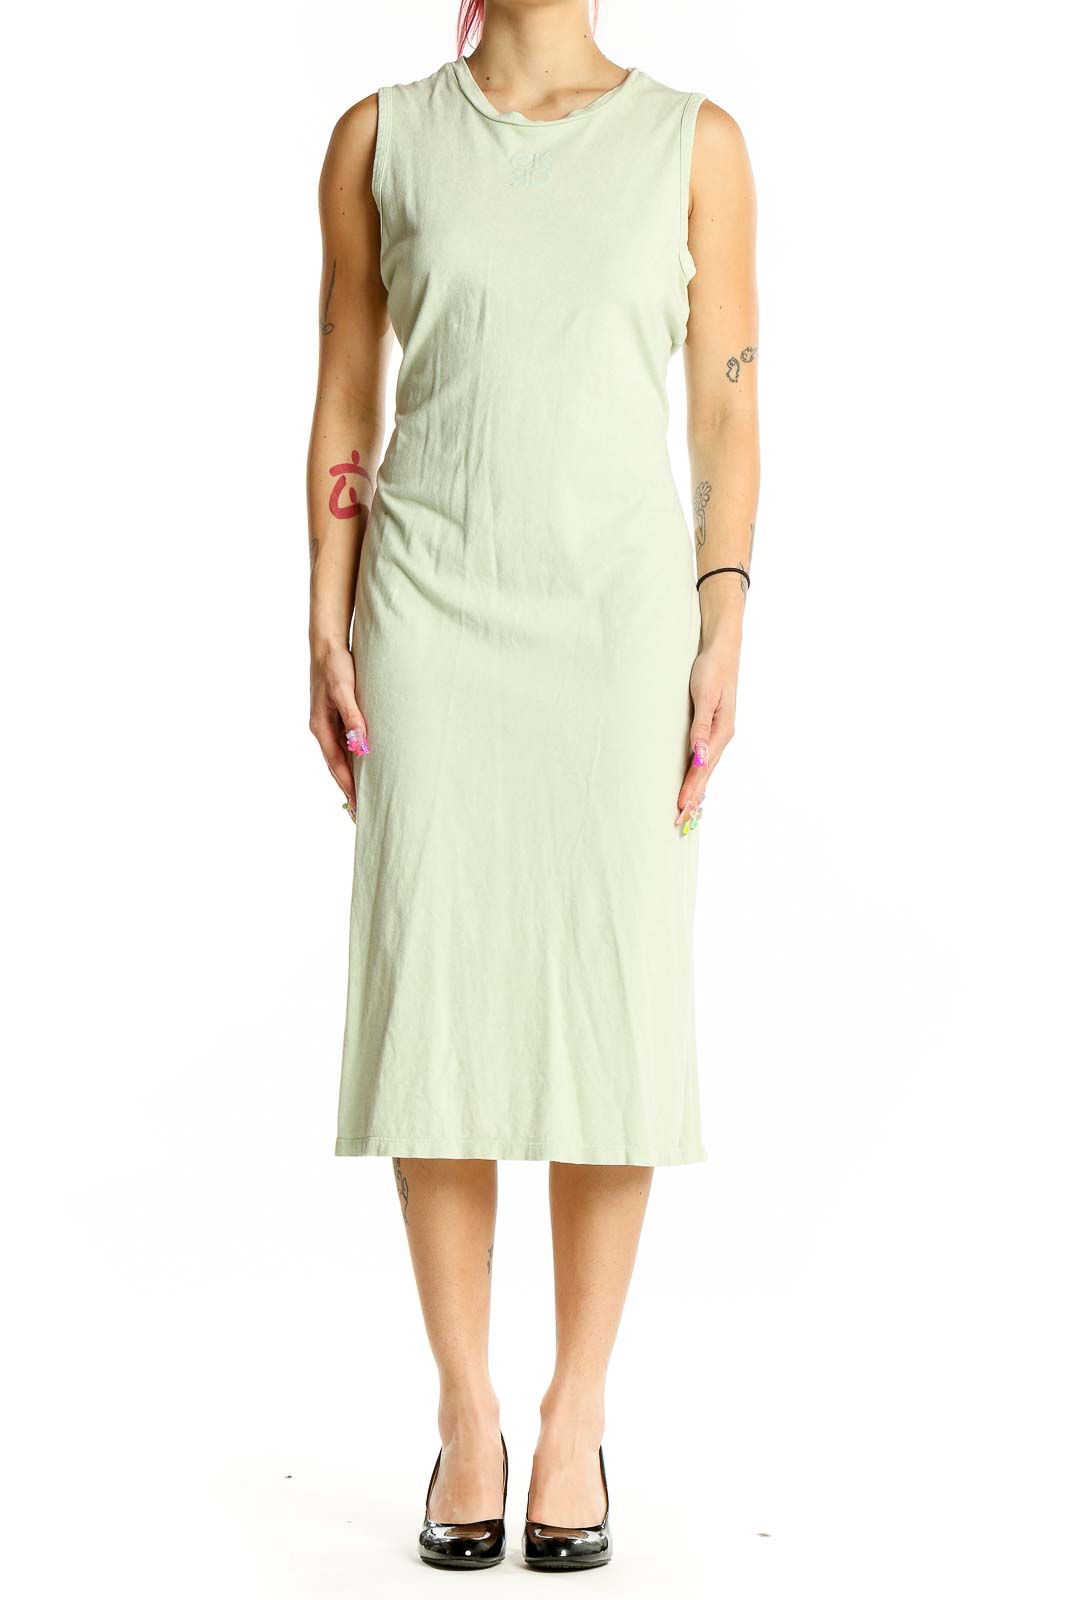 Green All Day Wear Solid Dress Front